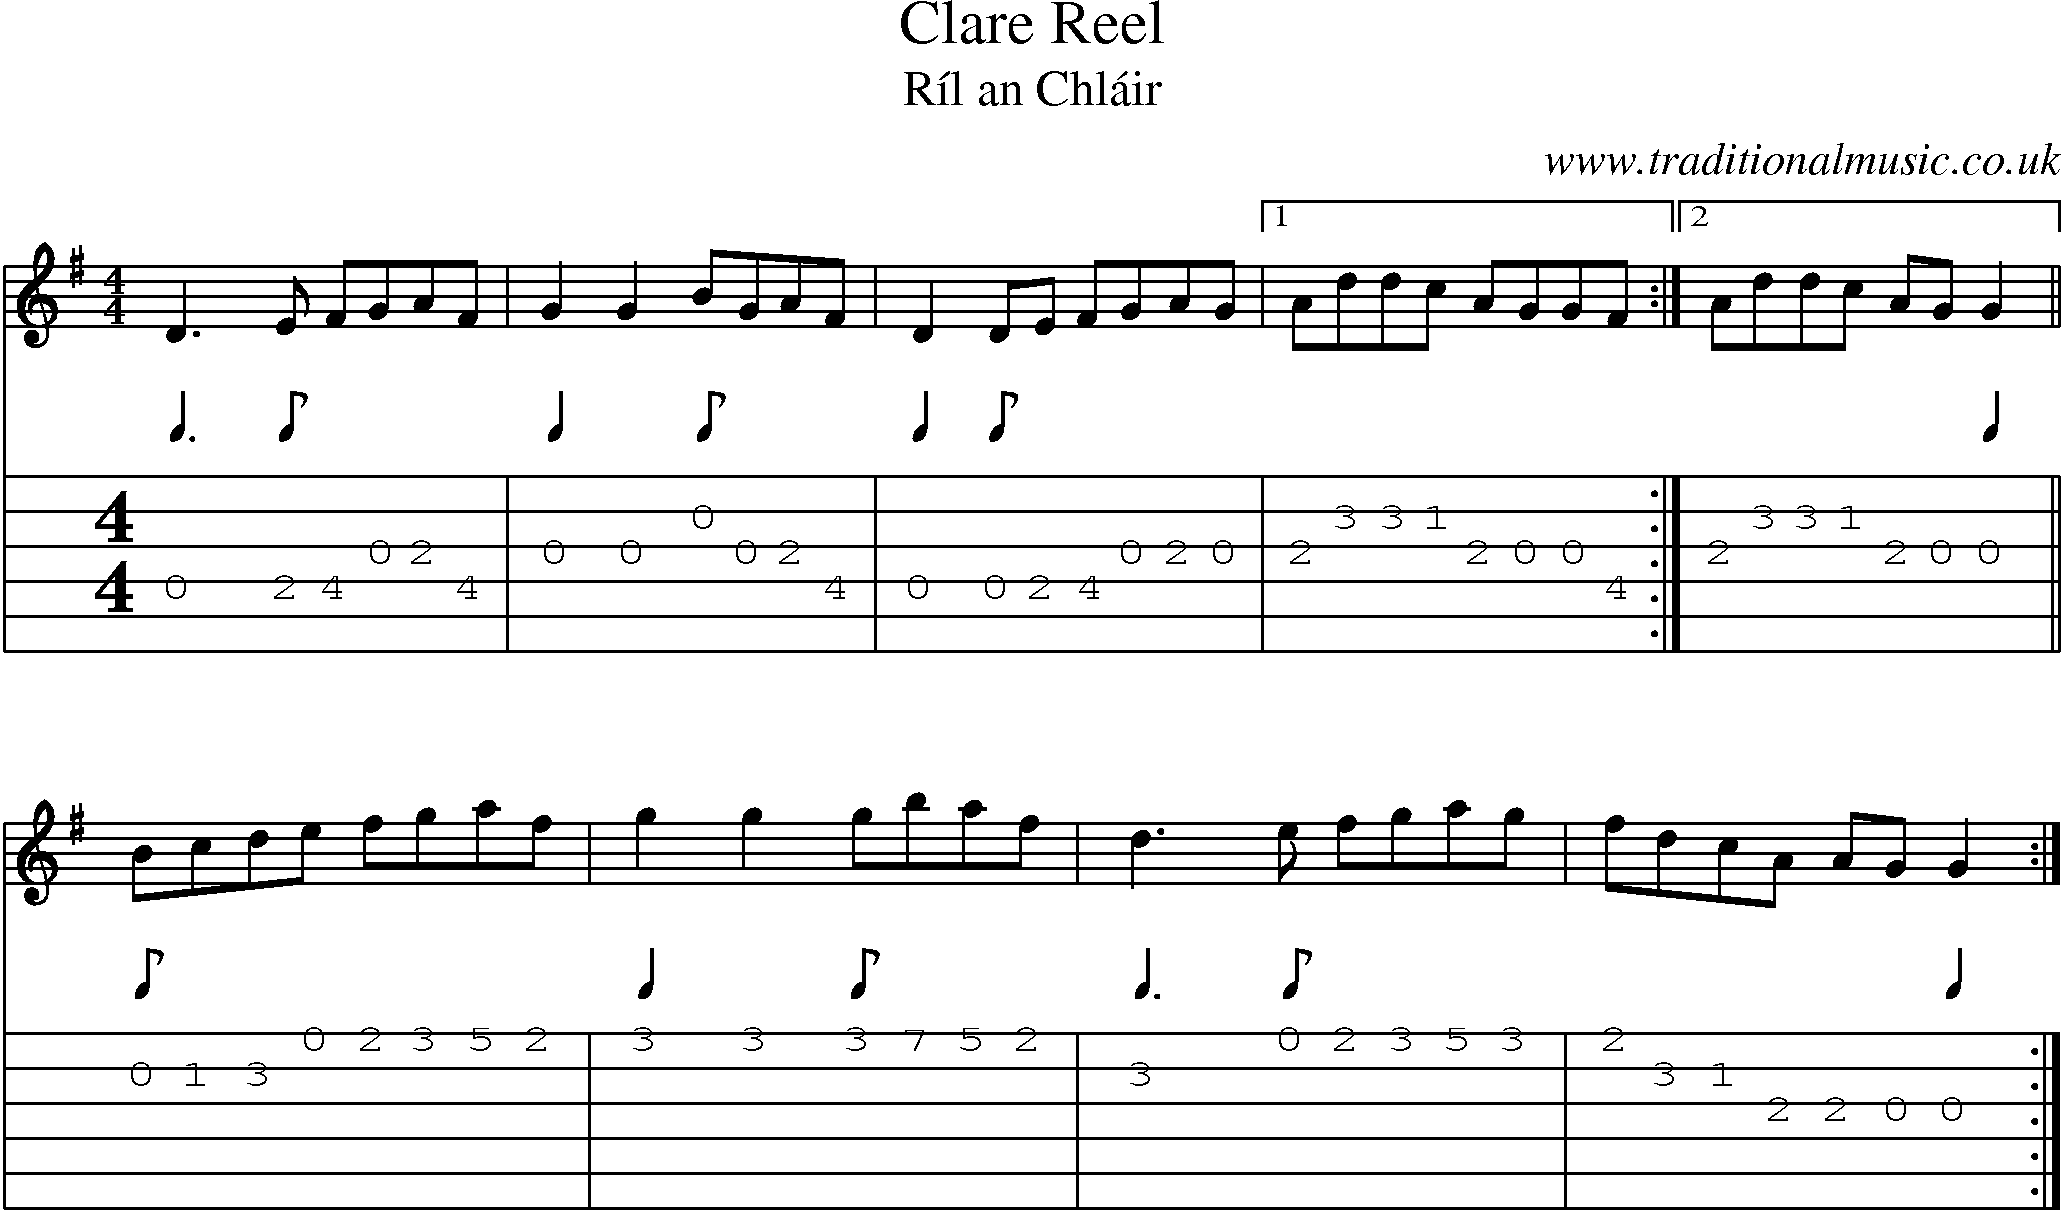 Music Score and Guitar Tabs for Clare Reel